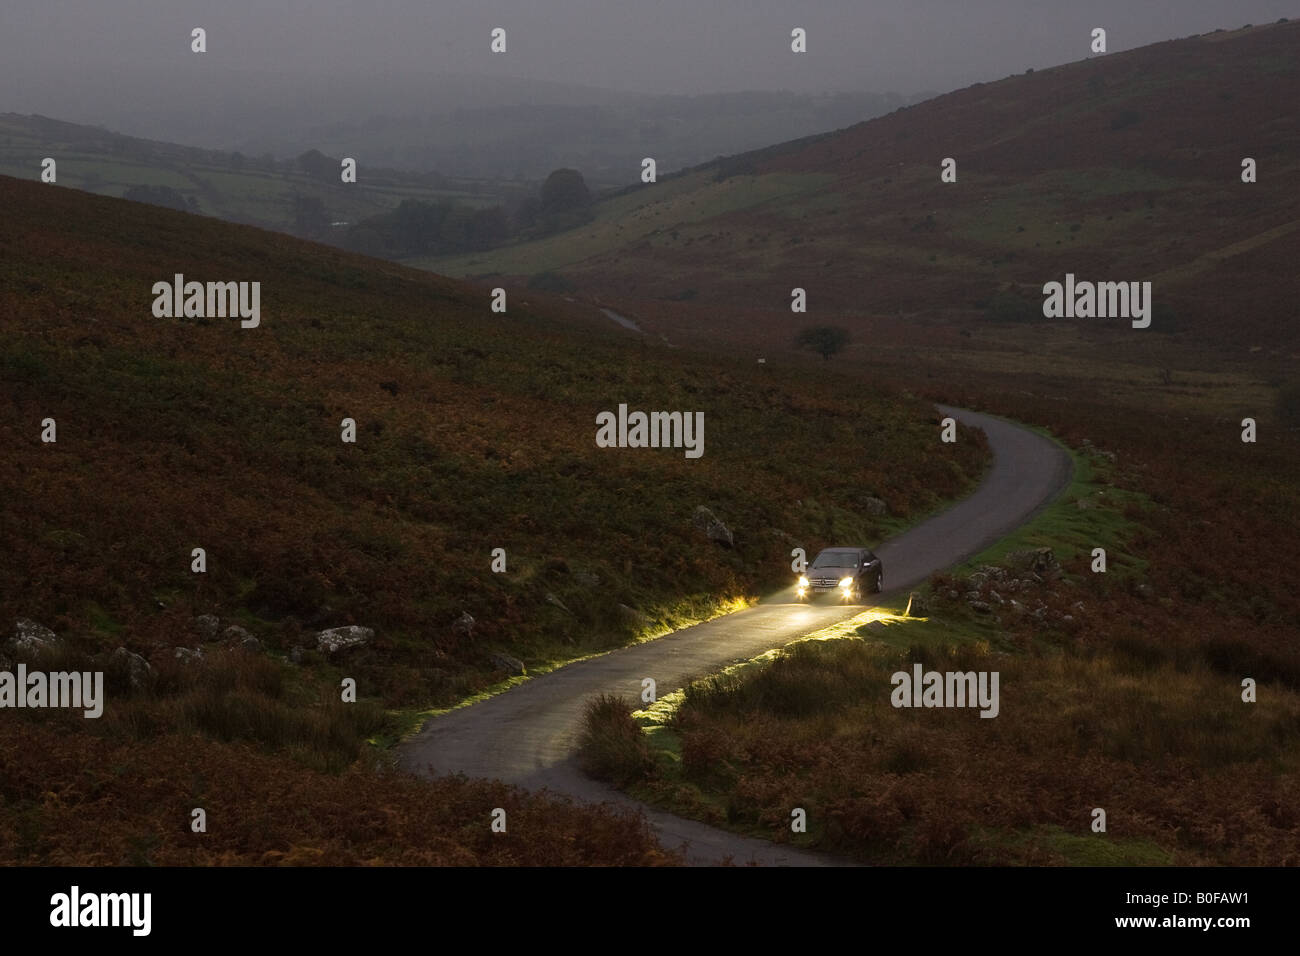 Mercedes car drives along a country road at night Dartmoor Devon United Kingdom Stock Photo